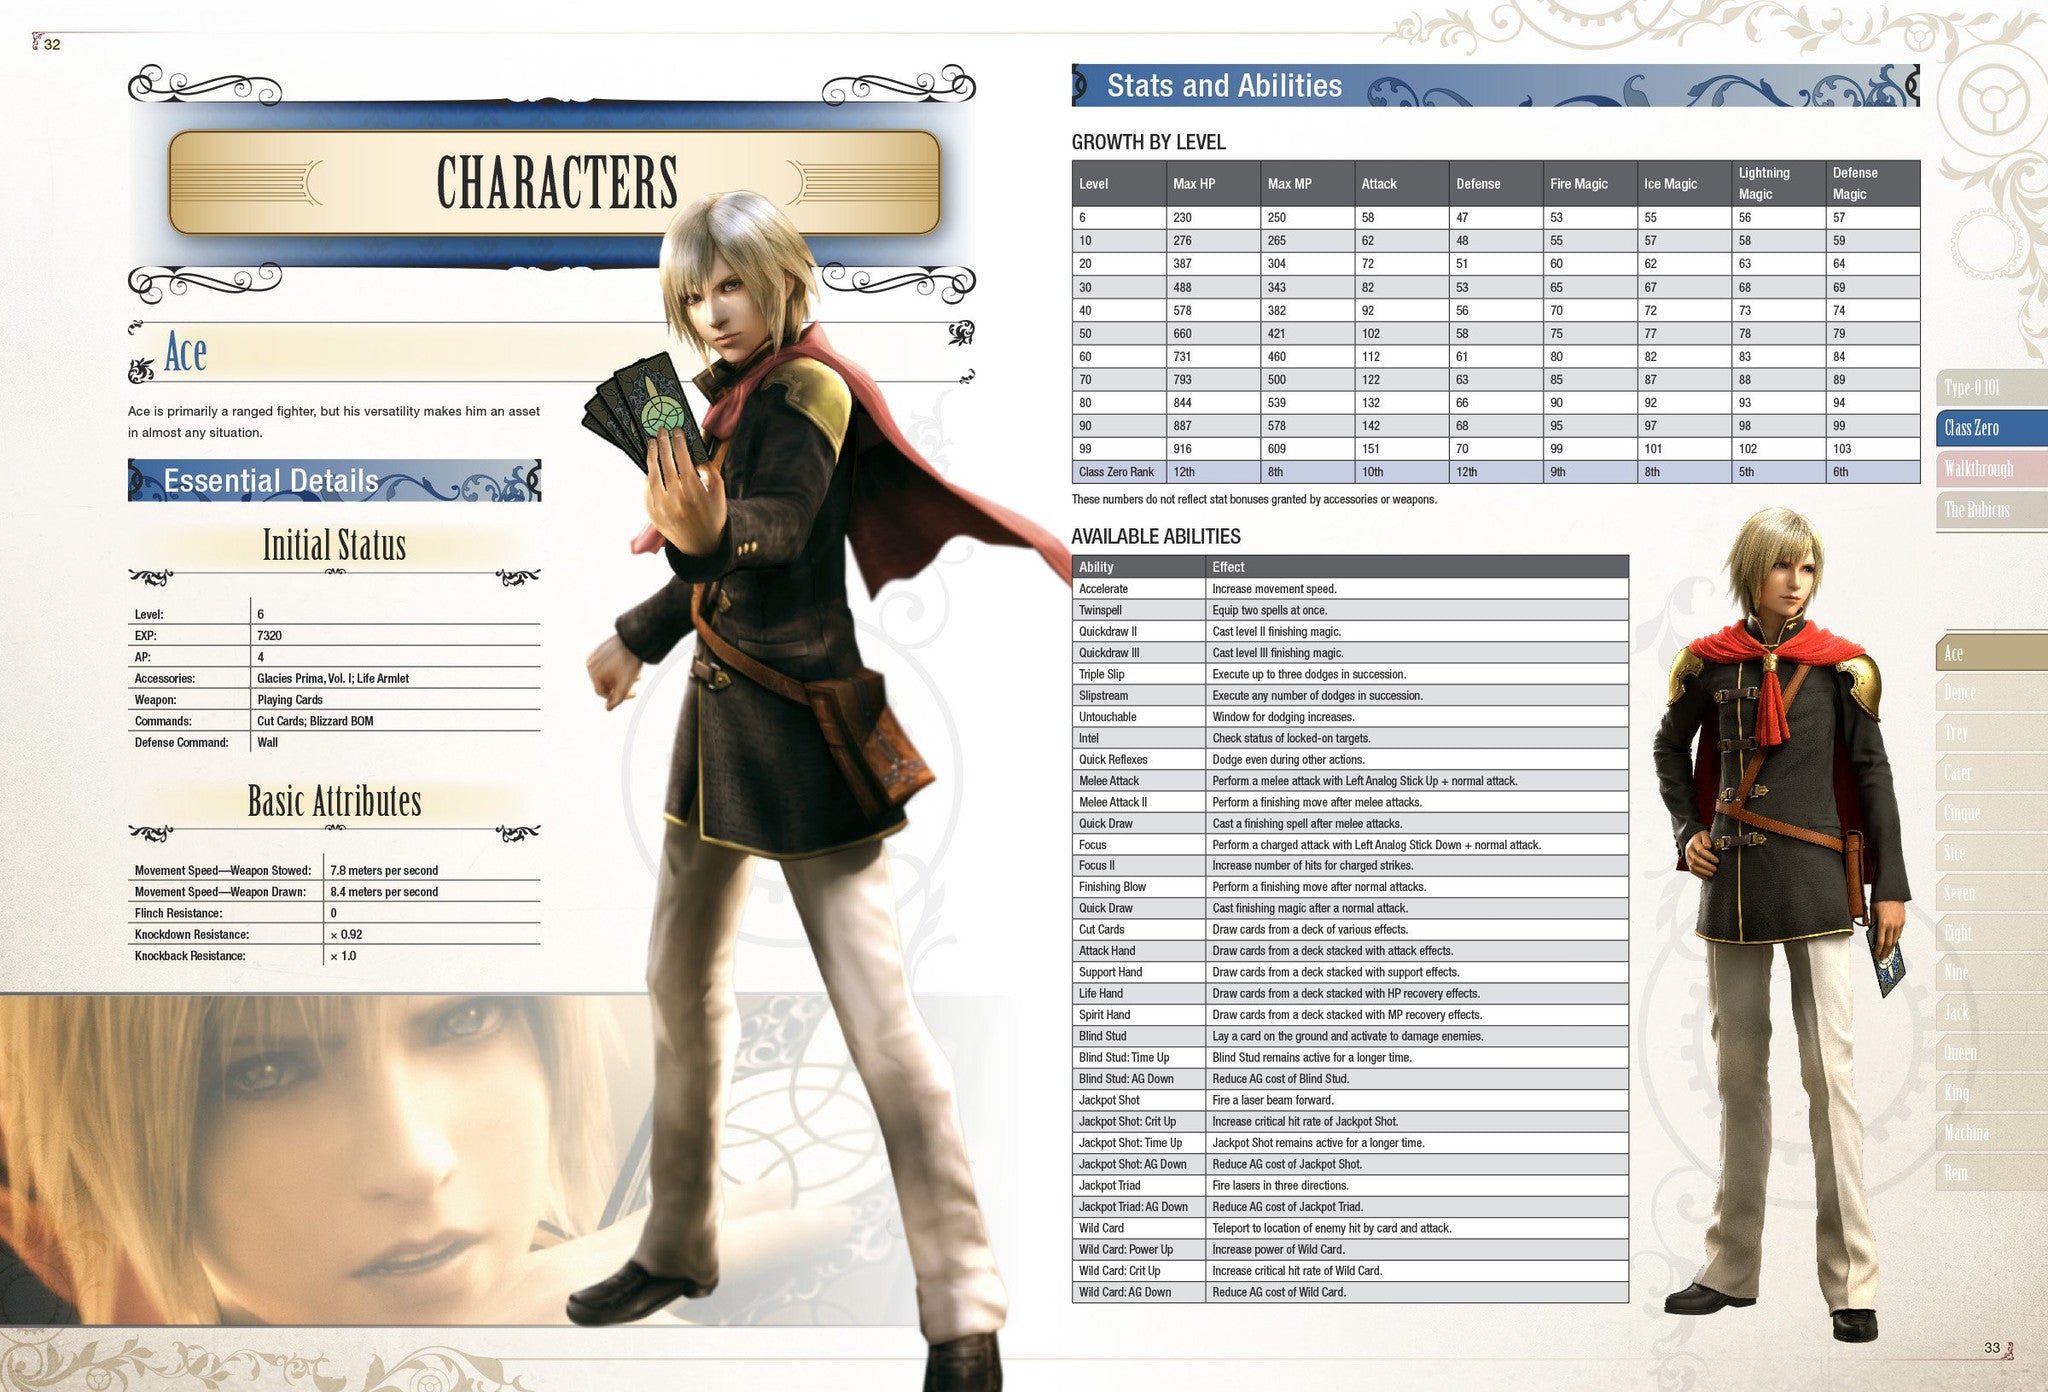 Final Fantasy Type 0-HD:  (Prima Official Game Guides)